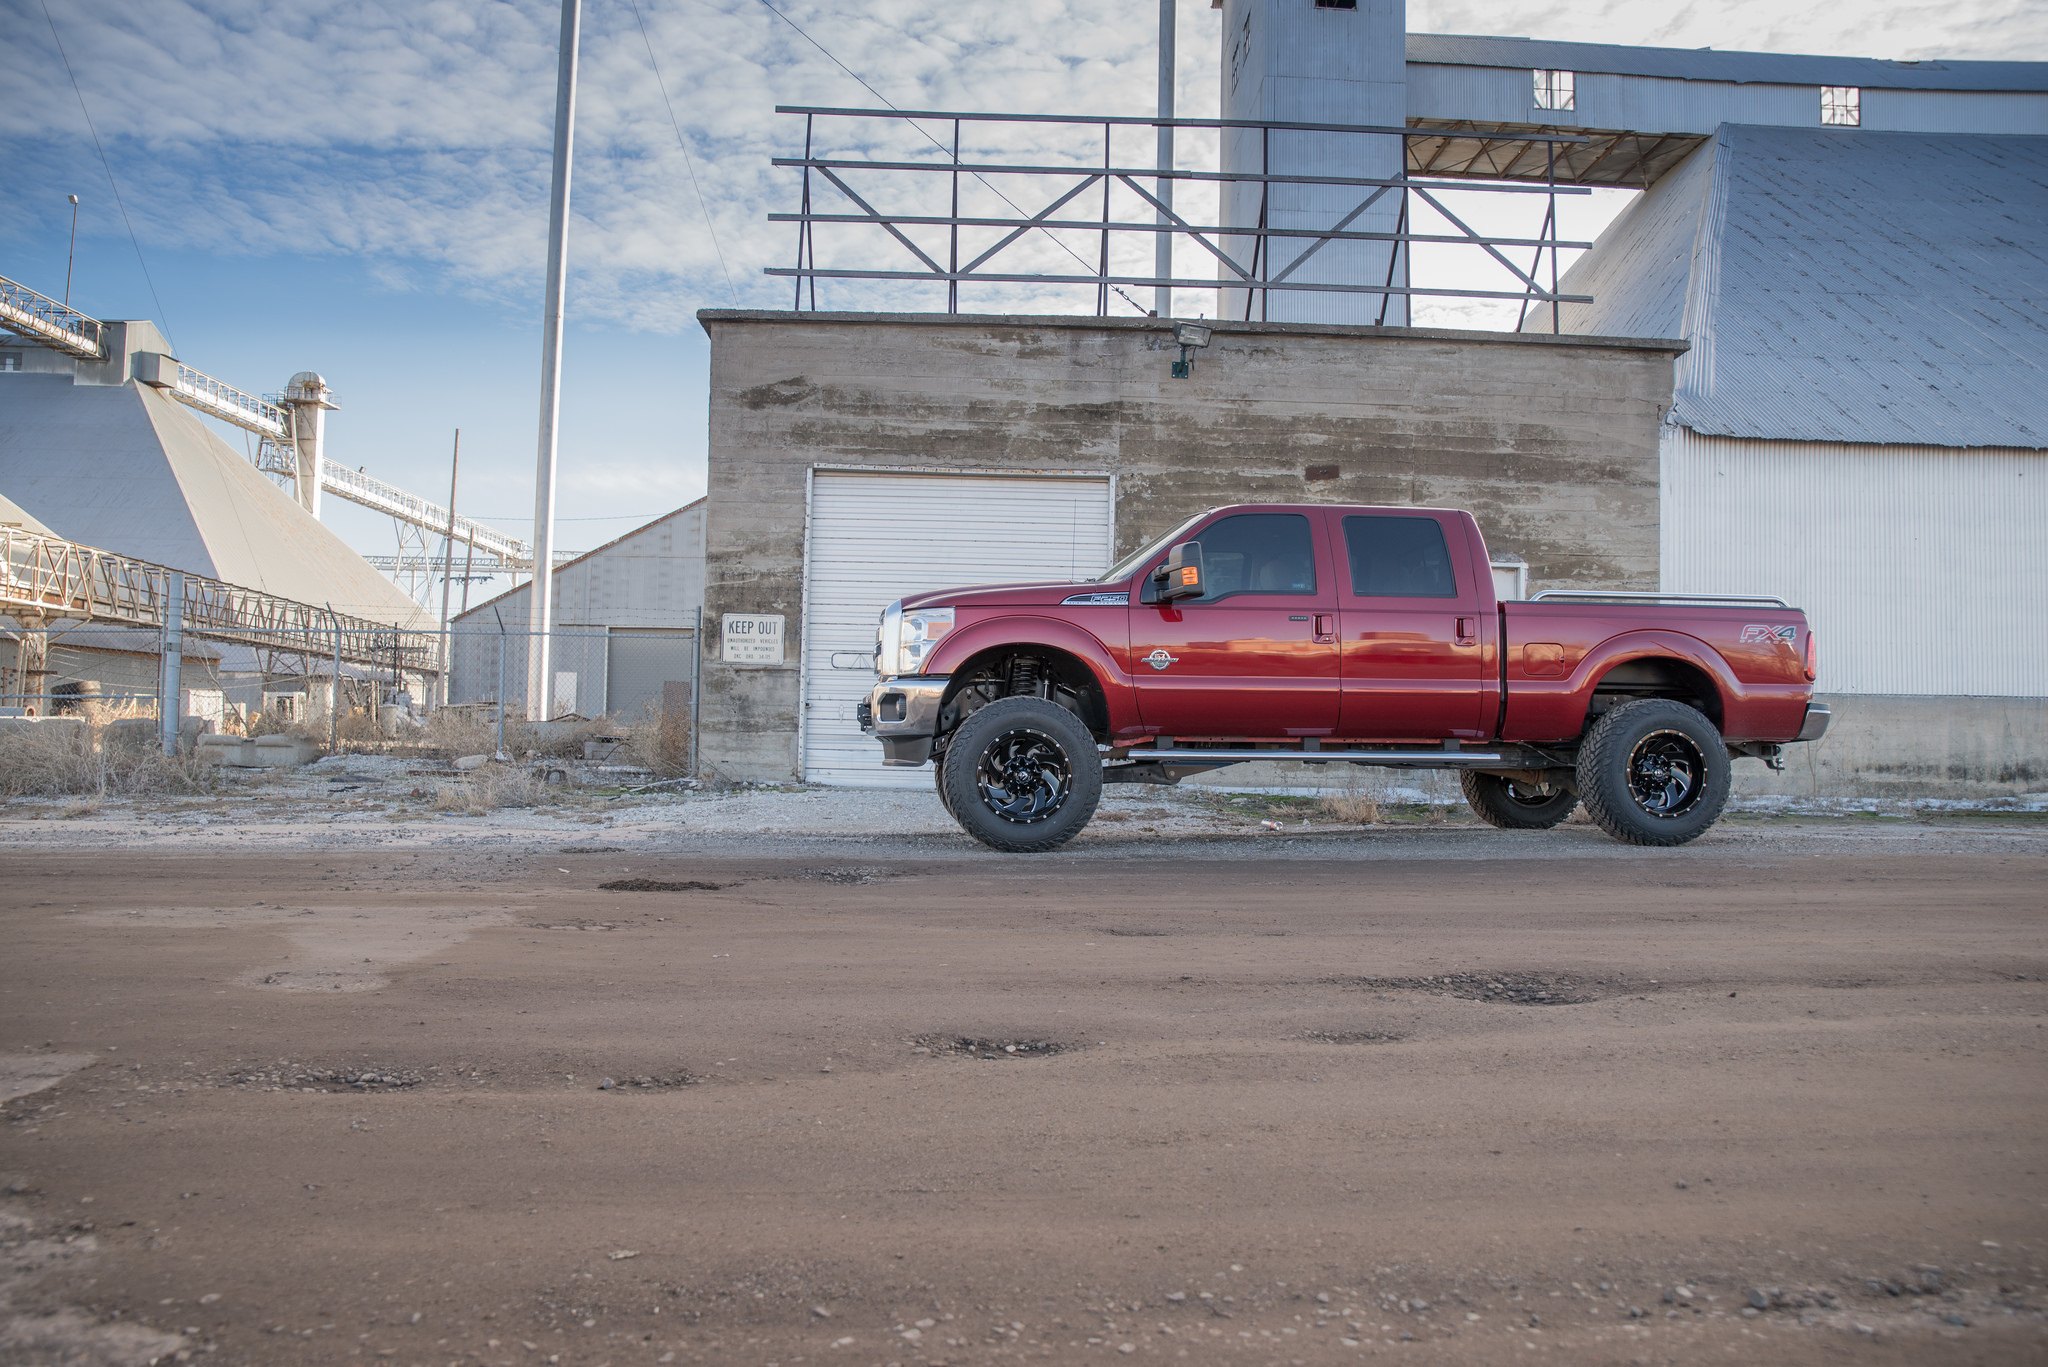 Aftermarket Side Steps on Red Ford F-250 - Photo by Fuel Offroad